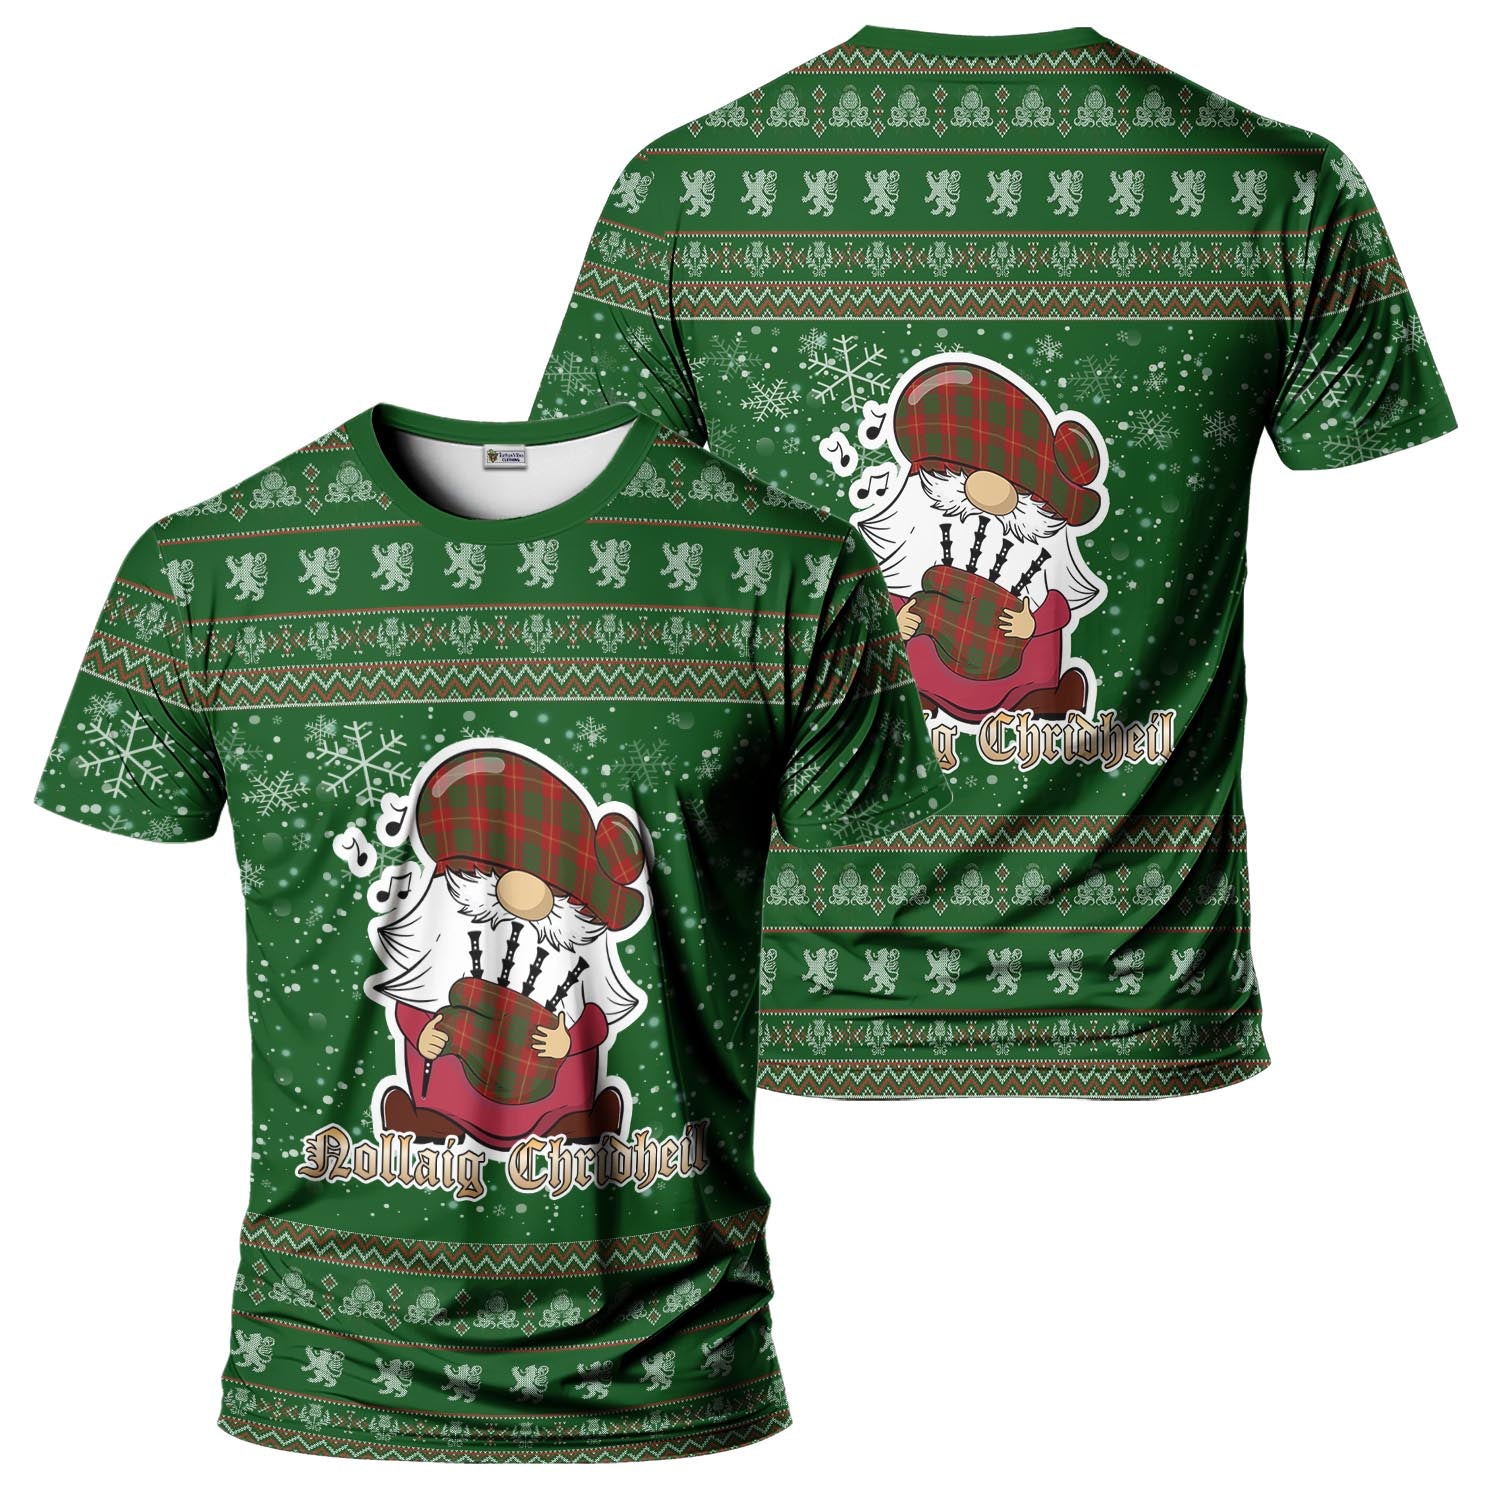 Cameron Clan Christmas Family T-Shirt with Funny Gnome Playing Bagpipes Men's Shirt Green - Tartanvibesclothing